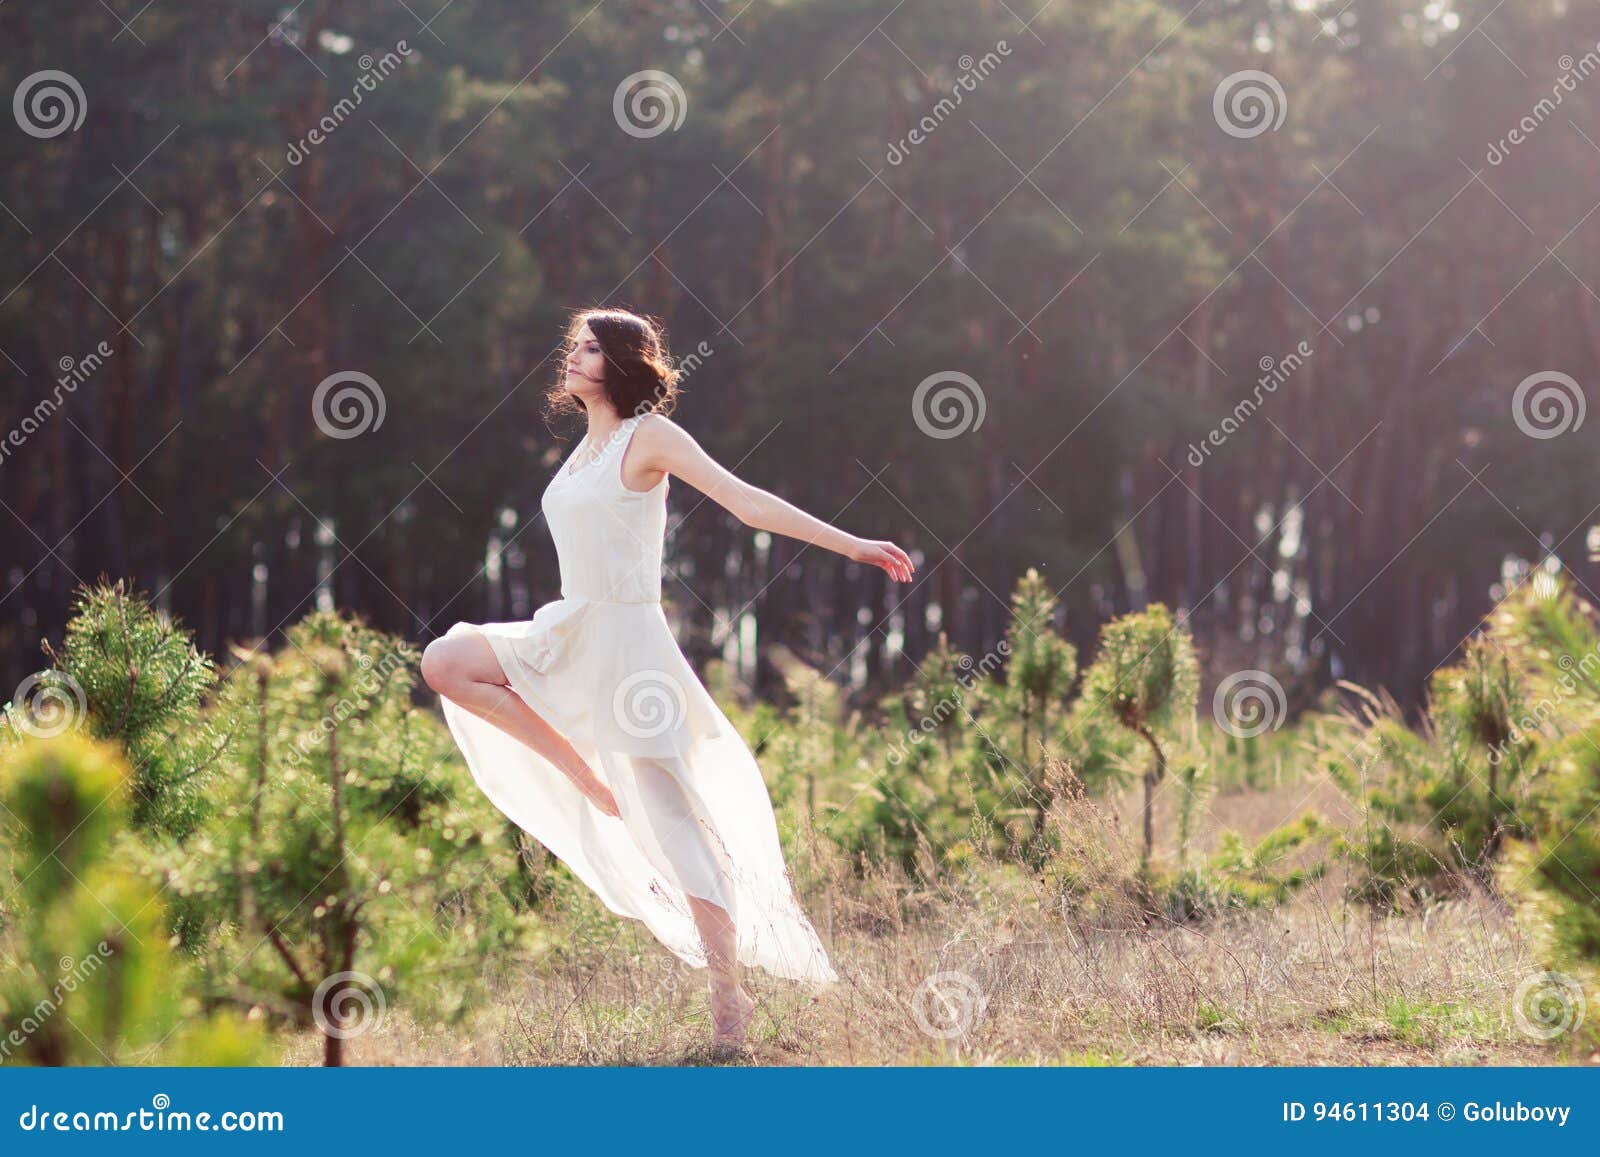 Contemporary Dances in Nature Stock Photo - Image of hair, dancer: 94611304